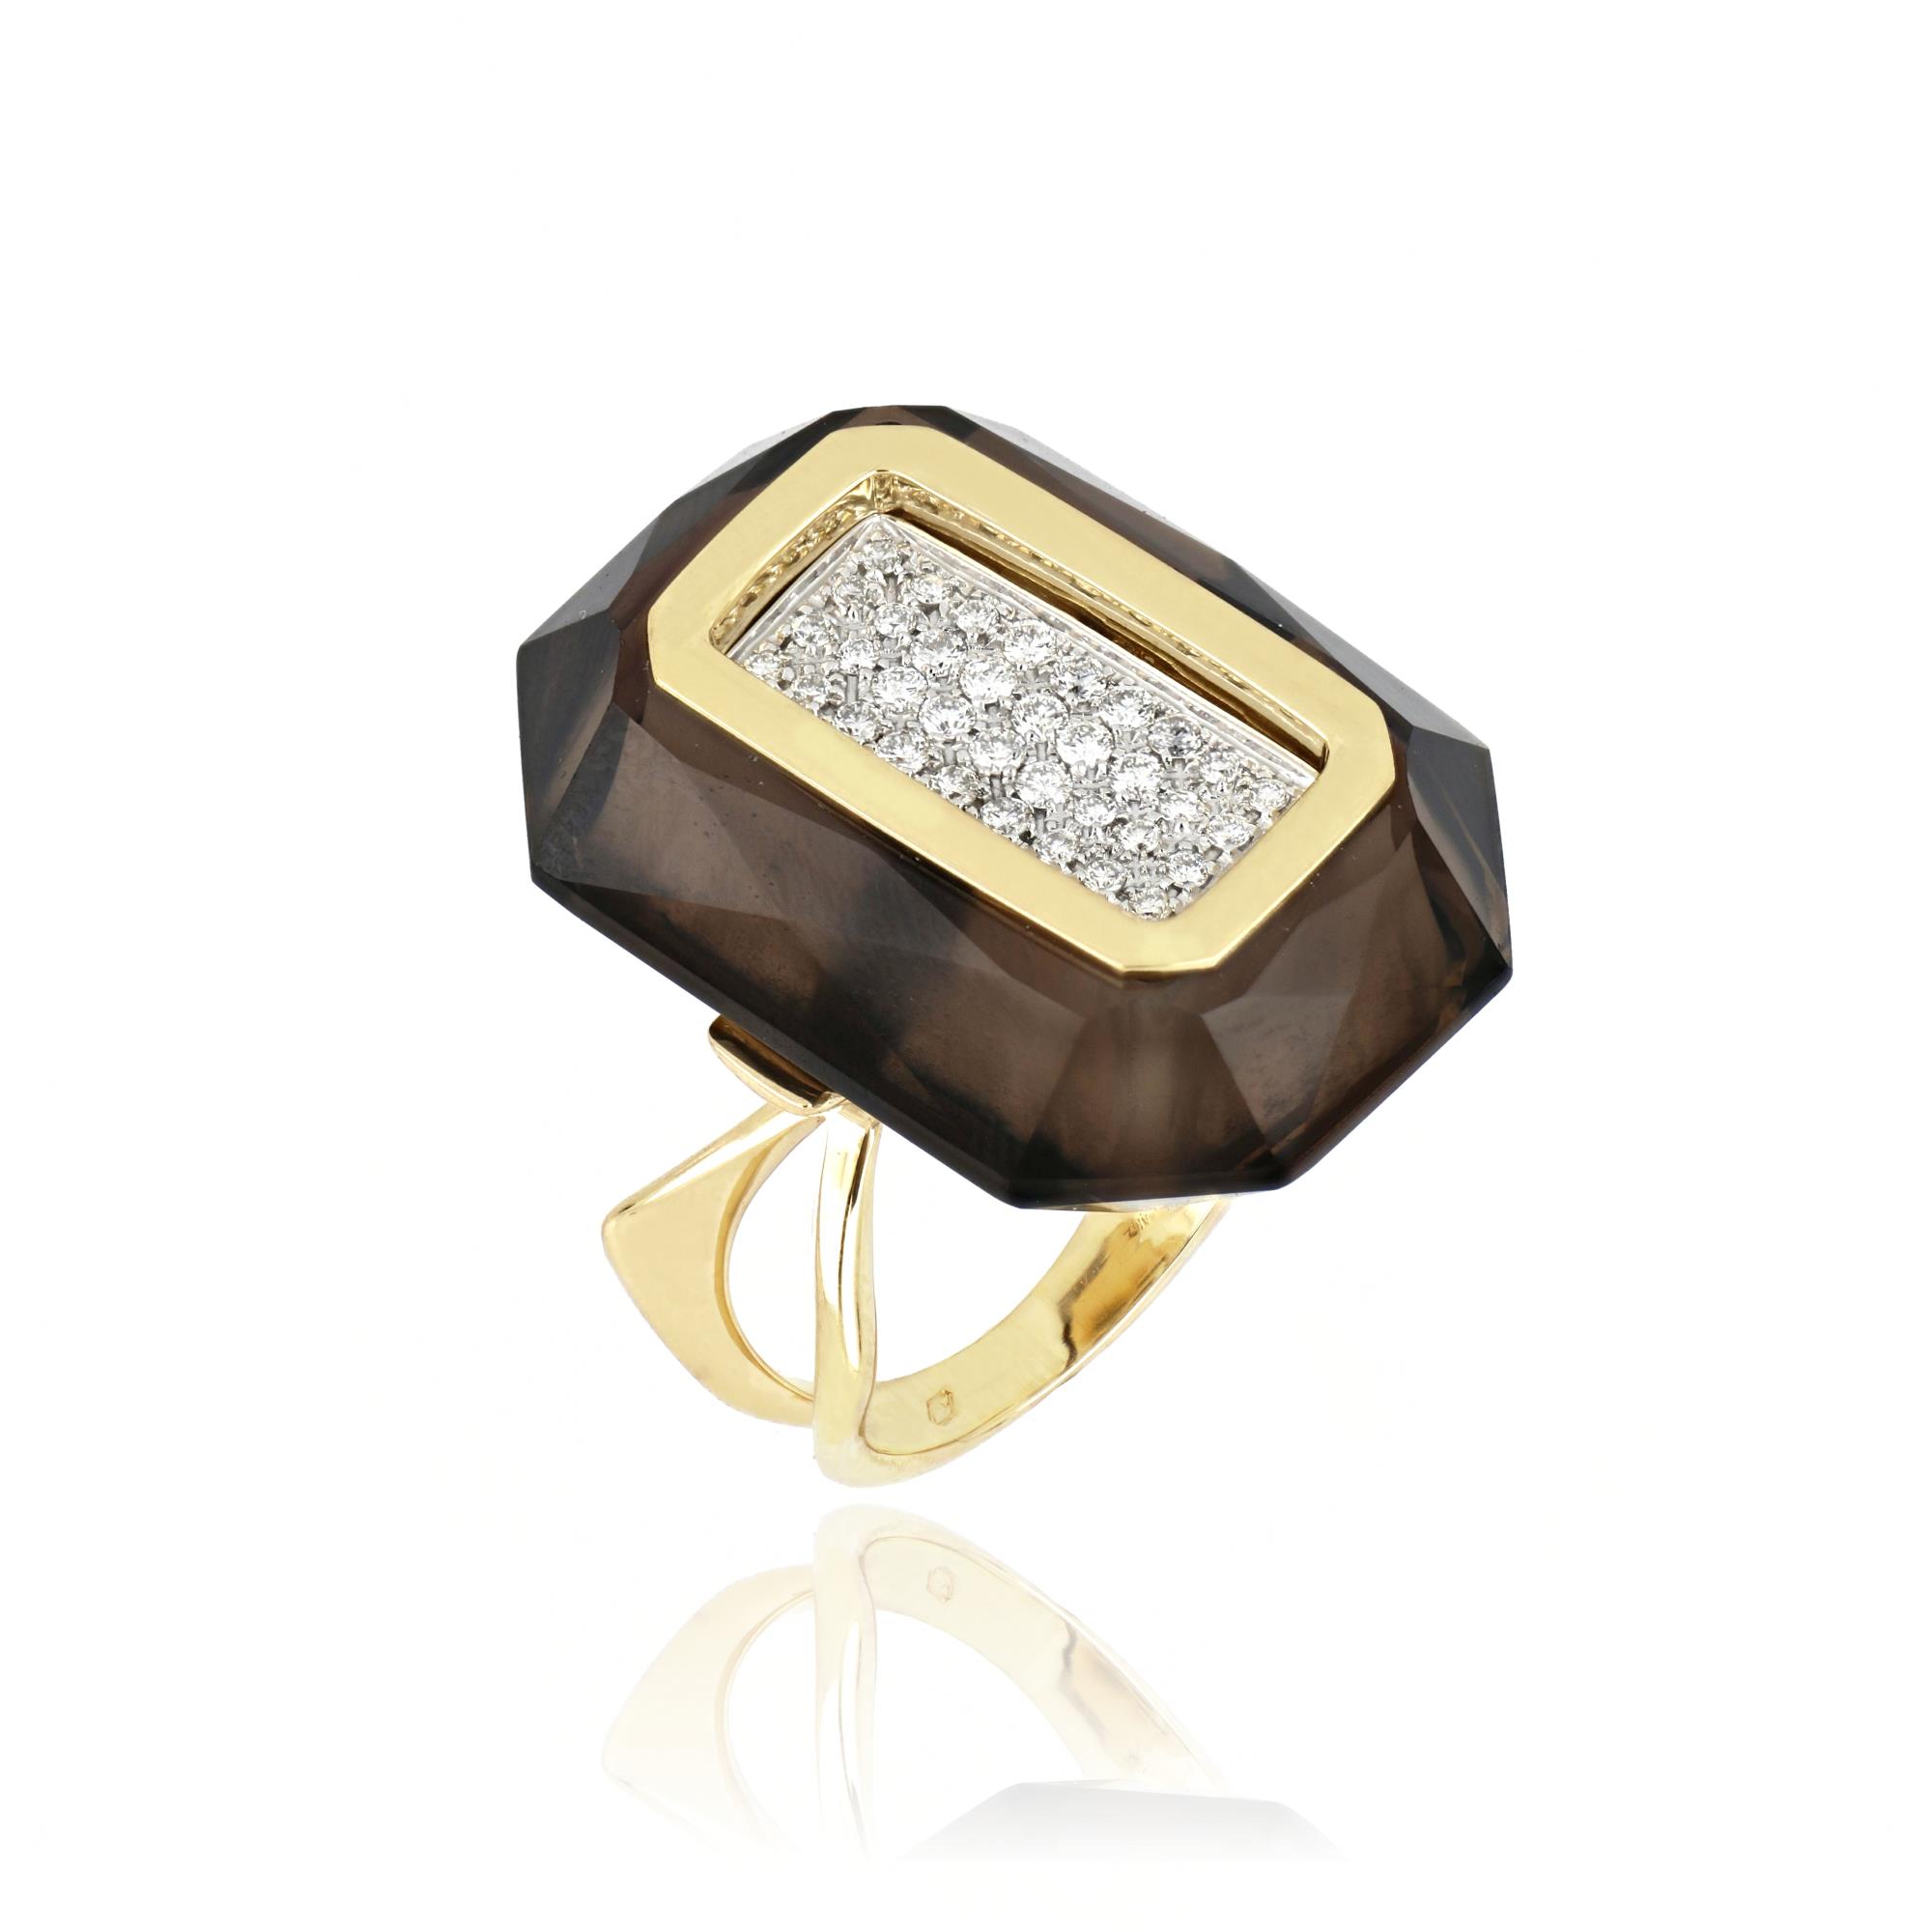 Gold ring with diamonds and smoky quartz - GOLD ART